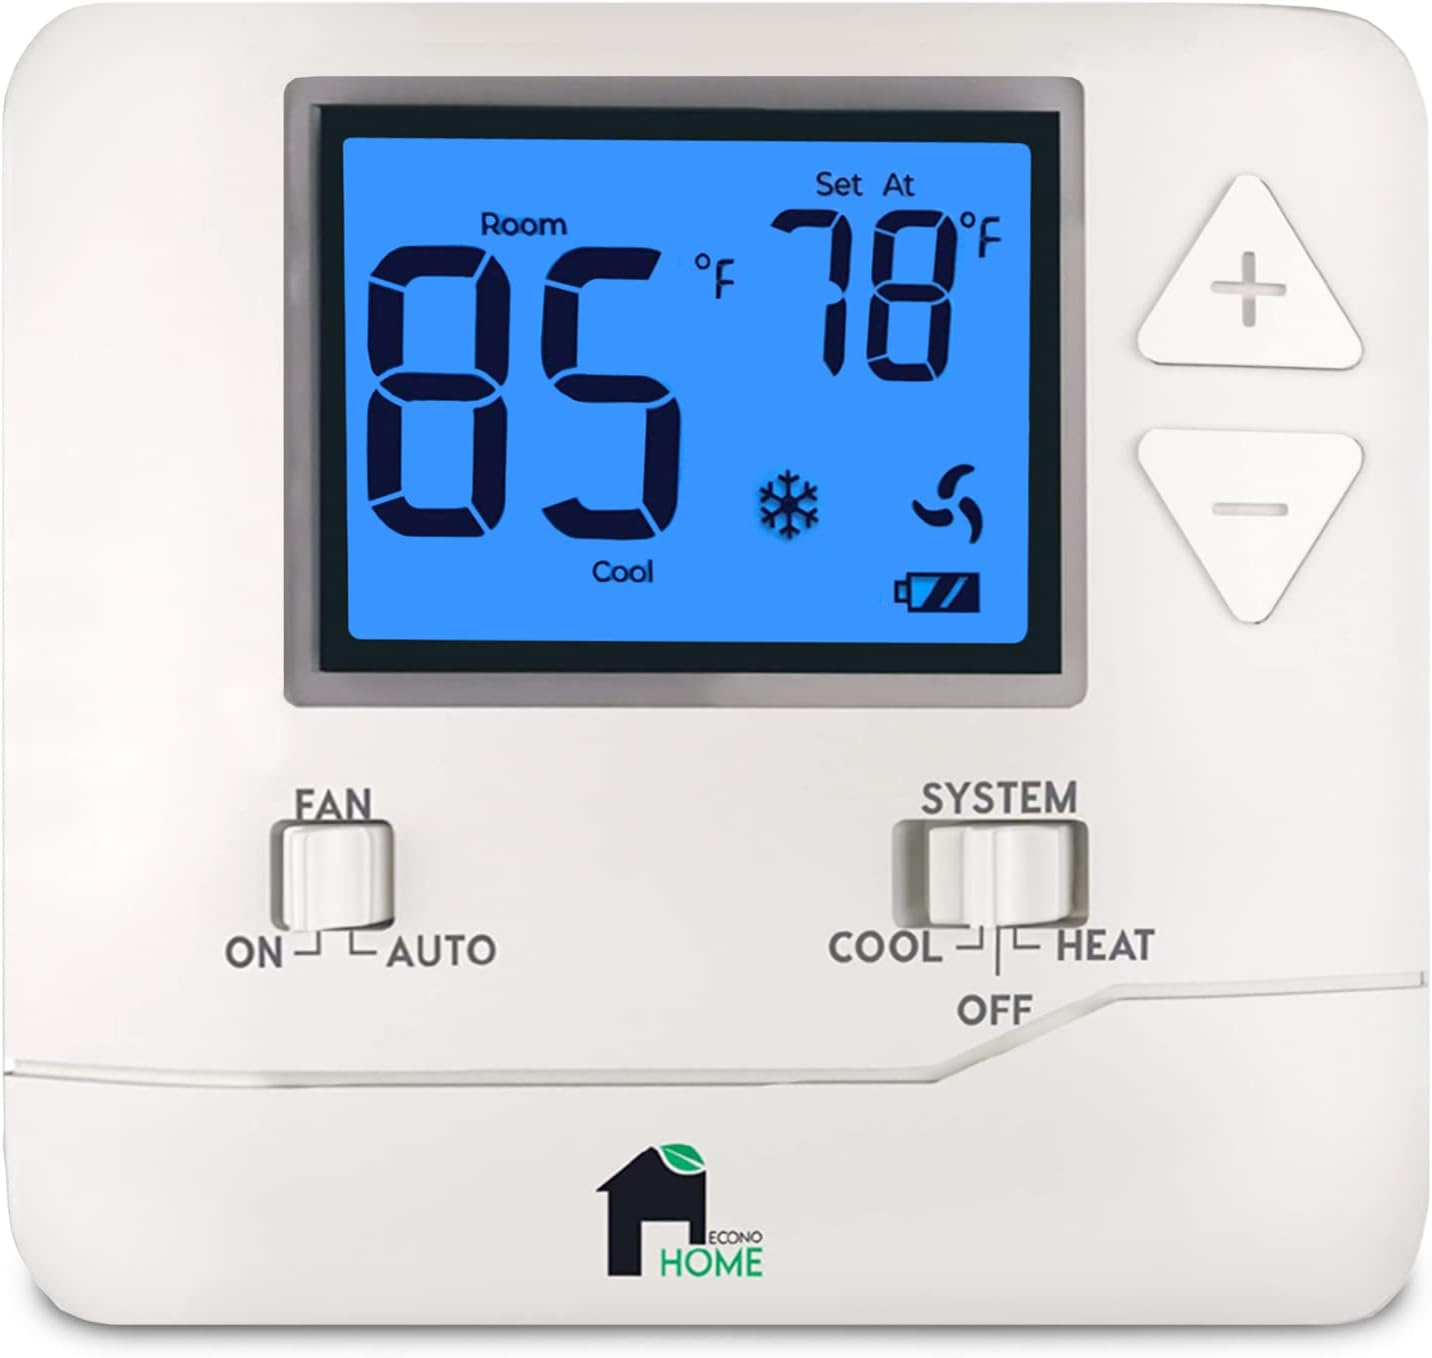 EconoHome Non-Programmable Thermostat for Home - Heat [...]